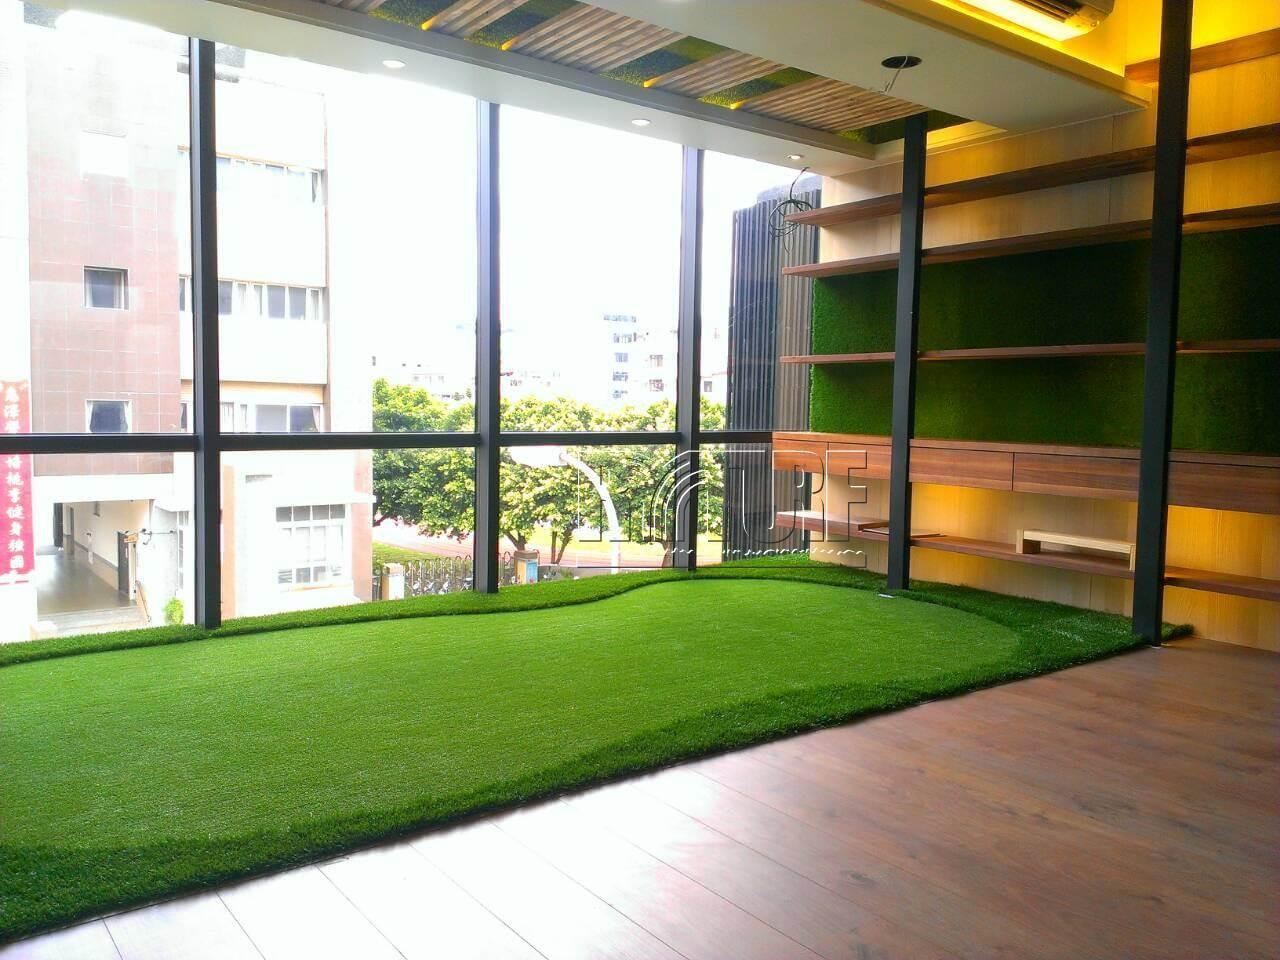 Artificial grass wall and green